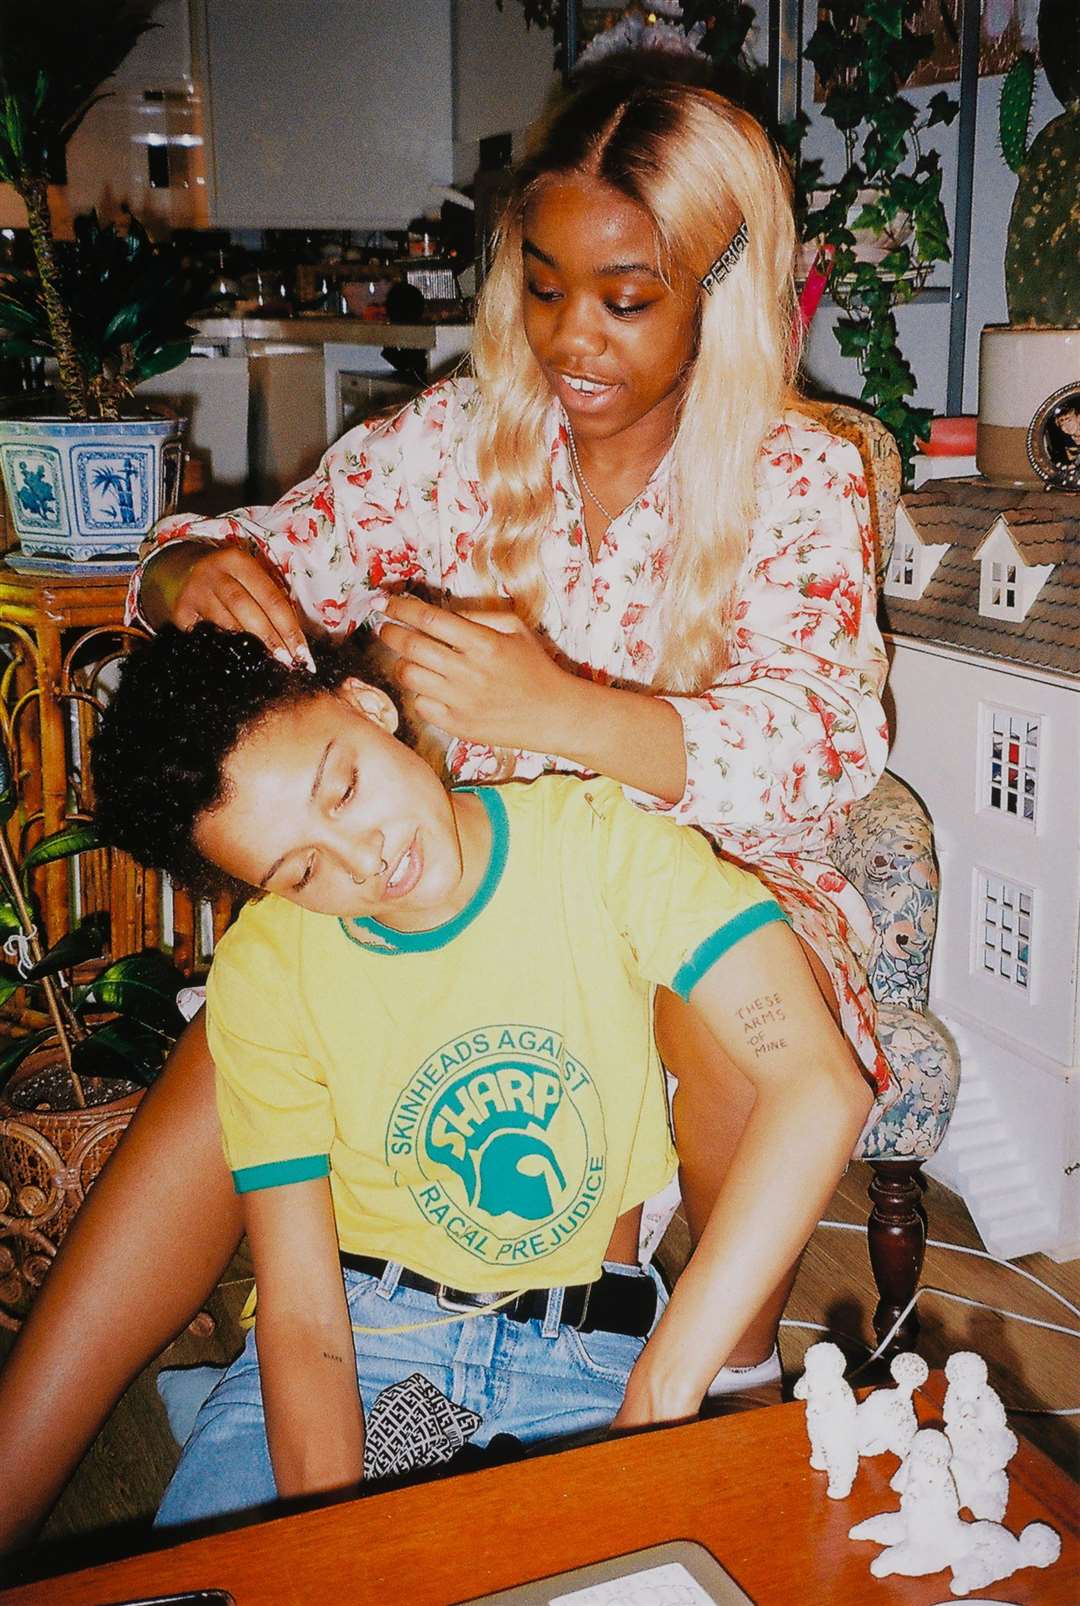 Photograph by Rene Matic titled ‘Chiddy Doing Rene’s hair’ in 2019 (Rene Matic/Tate/Sonal Bakrania)